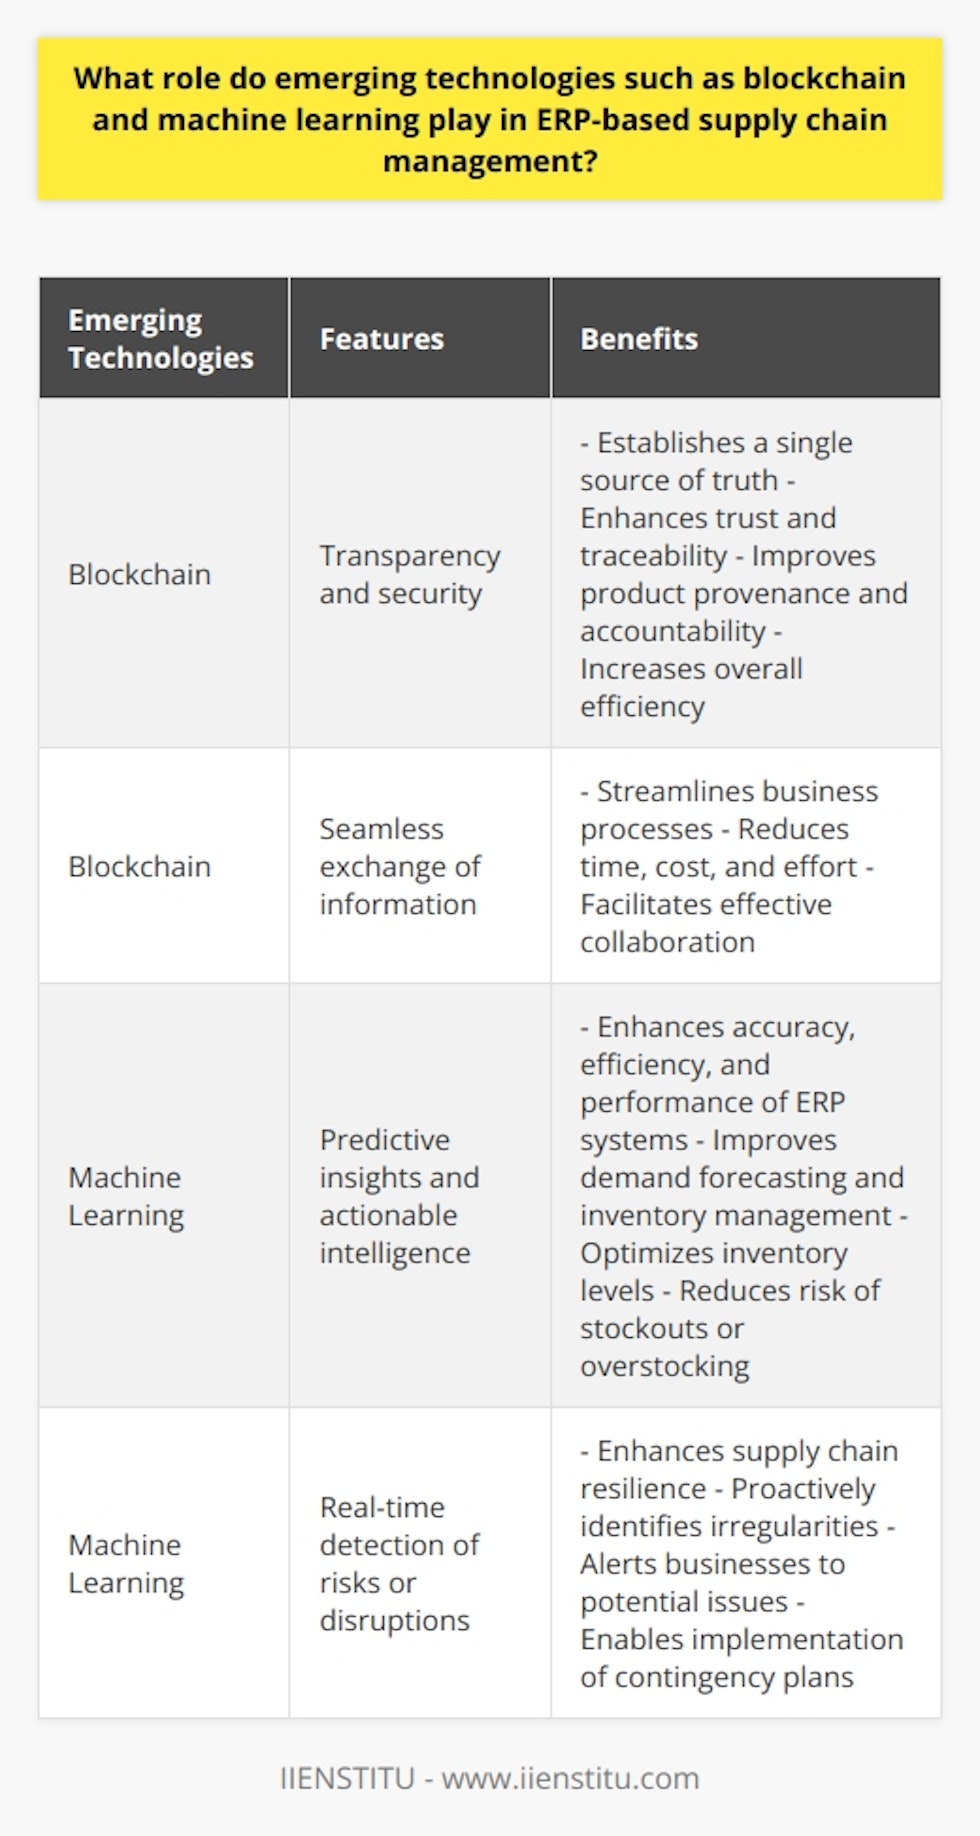 Blockchain and machine learning have a significant impact on ERP-based supply chain management. Blockchain technology, known for its transparency and security, provides a shared method of recording and tracking transactions. By integrating blockchain into the supply chain process, stakeholders can establish a single source of truth, enhancing trust and traceability. The transparency of blockchain ensures that all stages of the supply chain can be easily verified, improving product provenance, accountability, and overall efficiency.Furthermore, blockchain facilitates the flow of accurate data and goods within the supply chain, streamlining business processes. This seamless exchange of information eliminates bottlenecks and reduces the time, cost, and effort associated with traditional supply chain management methods. Stakeholders can collaborate more effectively and make better decisions regarding resource allocation.Machine learning, a subset of artificial intelligence, plays a crucial role in ERP-based supply chain solutions by providing predictive insights and actionable intelligence. Using data generated throughout the supply chain process, machine learning enhances the accuracy, efficiency, and overall performance of ERP systems.Machine learning techniques can assist businesses in improving demand forecasting and inventory management. By utilizing sophisticated algorithms and pattern recognition, machine learning helps anticipate customer demand and optimize inventory levels. This results in better operational efficiency and reduces the risk of stockouts or overstocking, ensuring that organizations can meet customer needs accurately.Moreover, machine learning tools enhance supply chain resilience by detecting potential risks or disruptions in real-time. By monitoring and analyzing data from various sources within the supply chain, machine learning can proactively identify irregularities and alert businesses to potential issues before they escalate. Organizations can implement contingency plans and mitigate the impact of disruptions, ensuring smooth operations.In conclusion, emerging technologies like blockchain and machine learning bring significant improvements to ERP-based supply chain management. These technologies enhance trust, traceability, operational efficiency, and resilience, equipping businesses with powerful tools to succeed in the global marketplace.